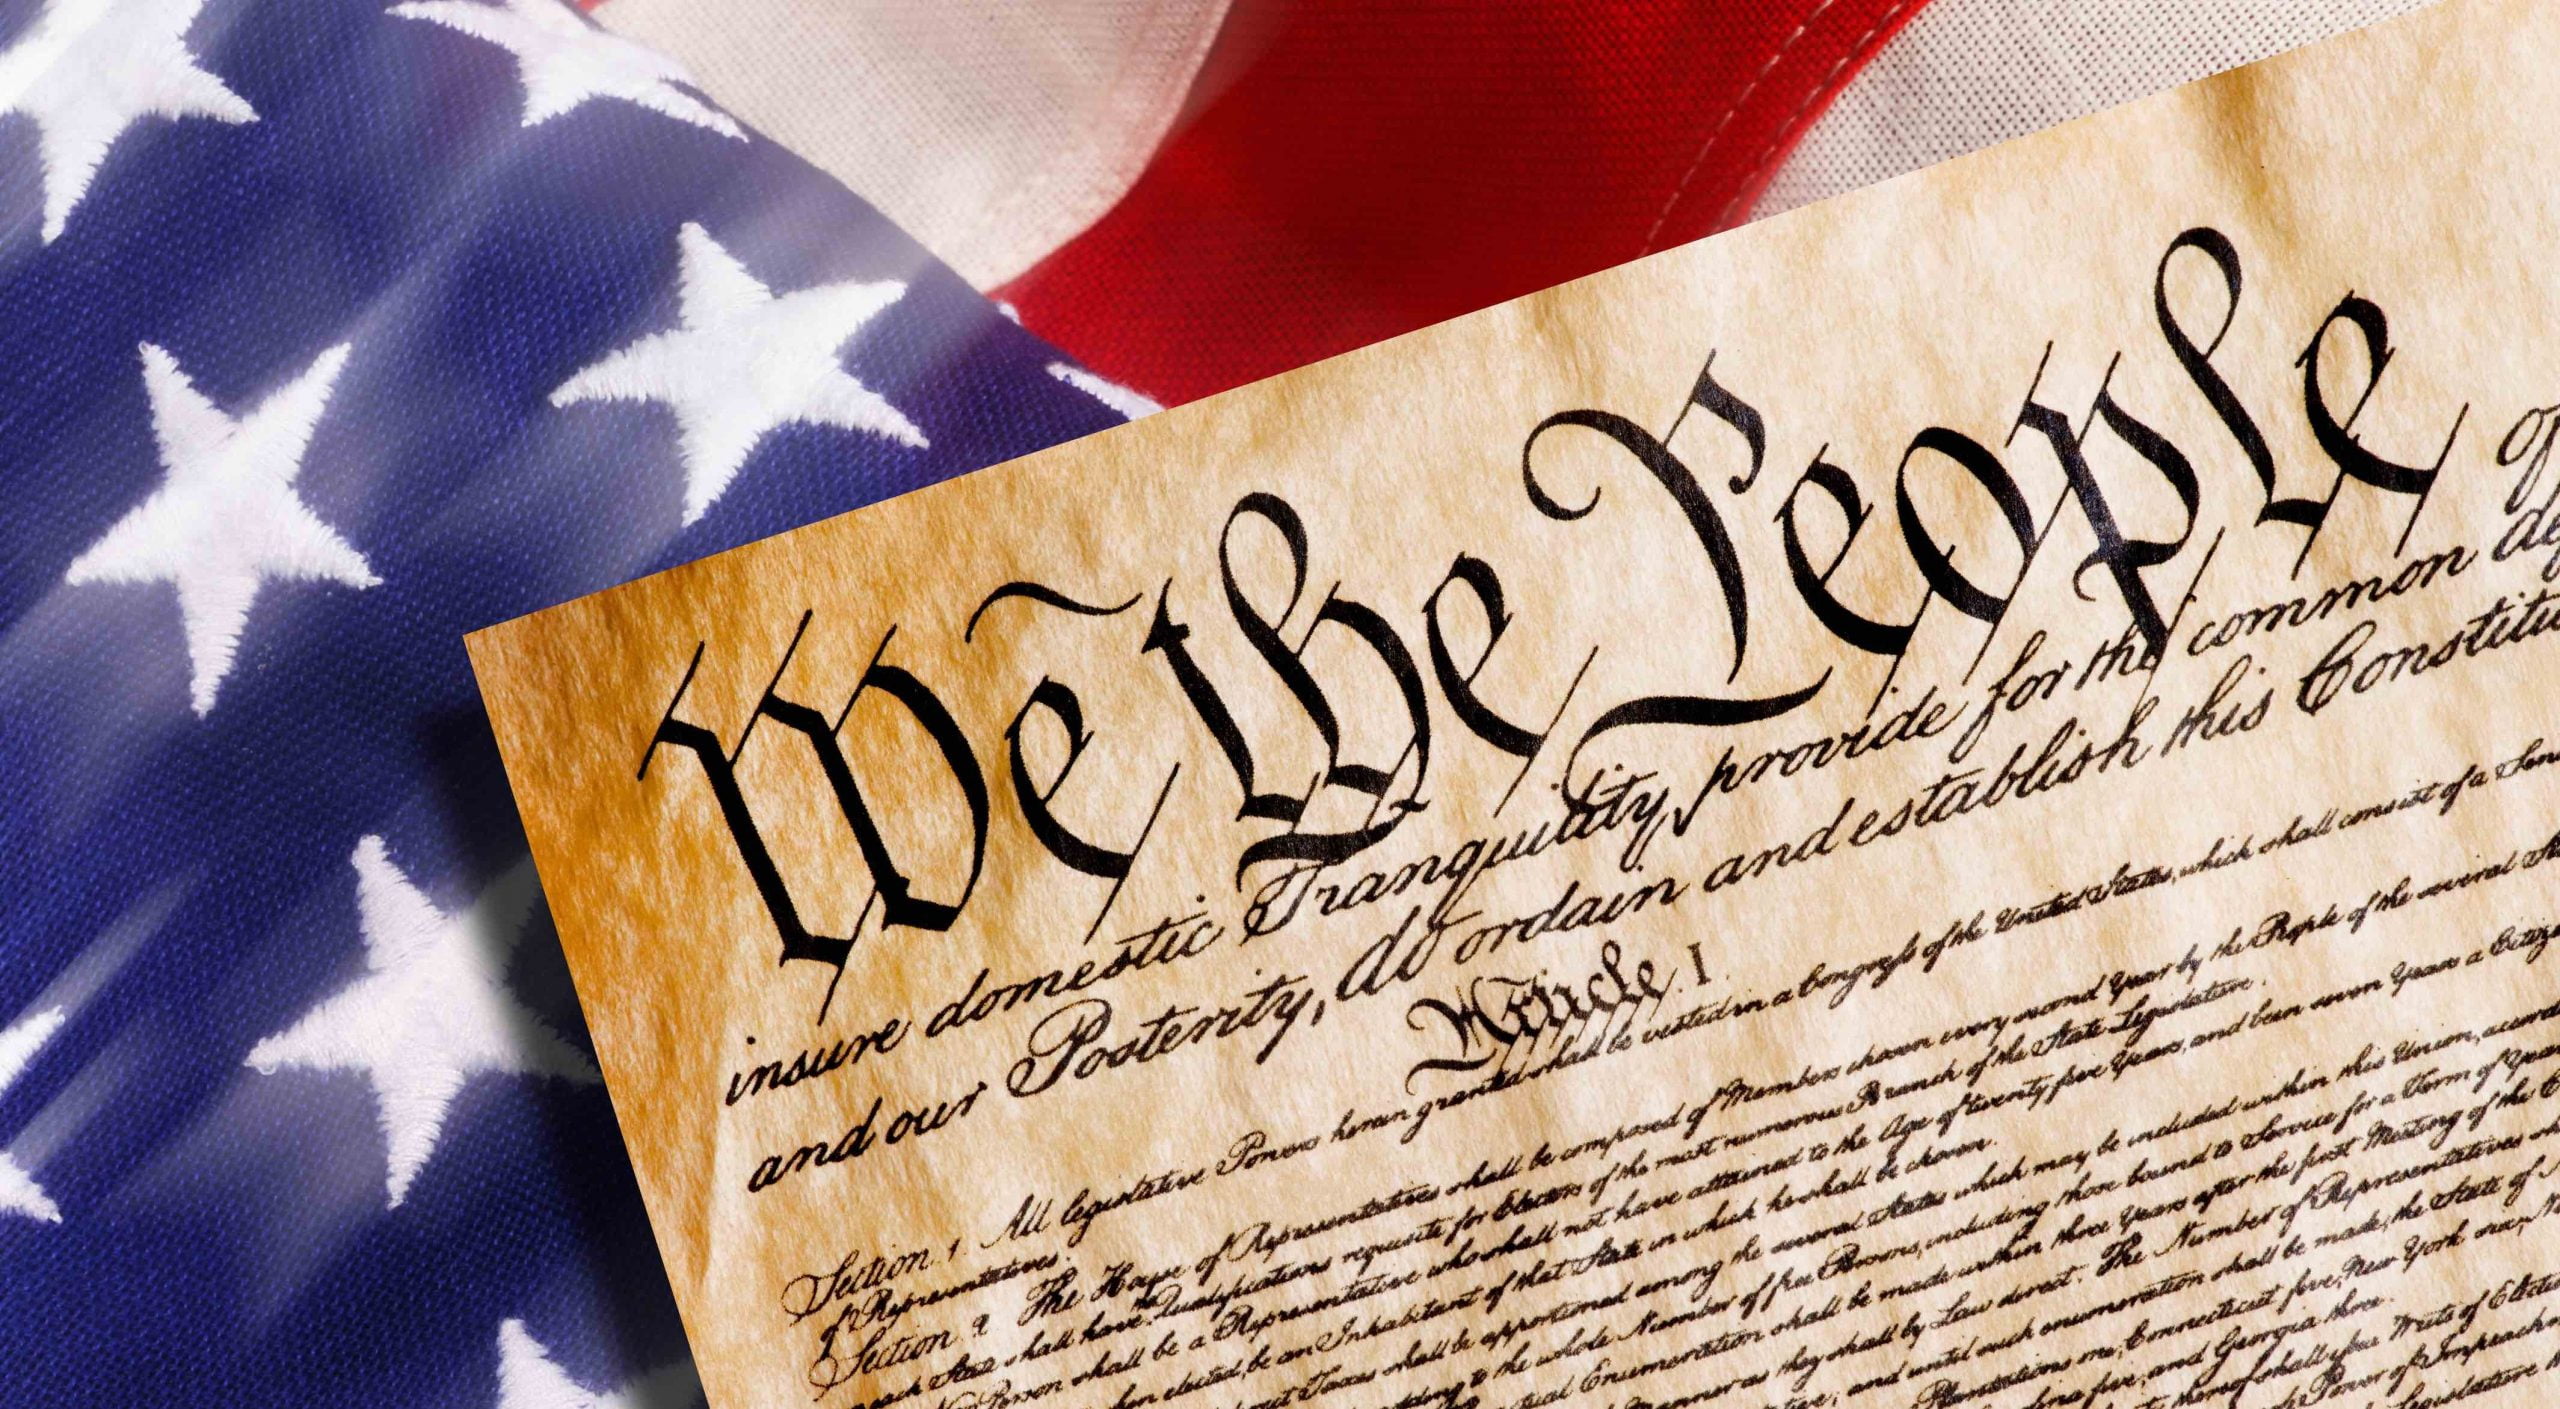 read-the-constitution-day-live-broadcast-9-17-at-11-am-west